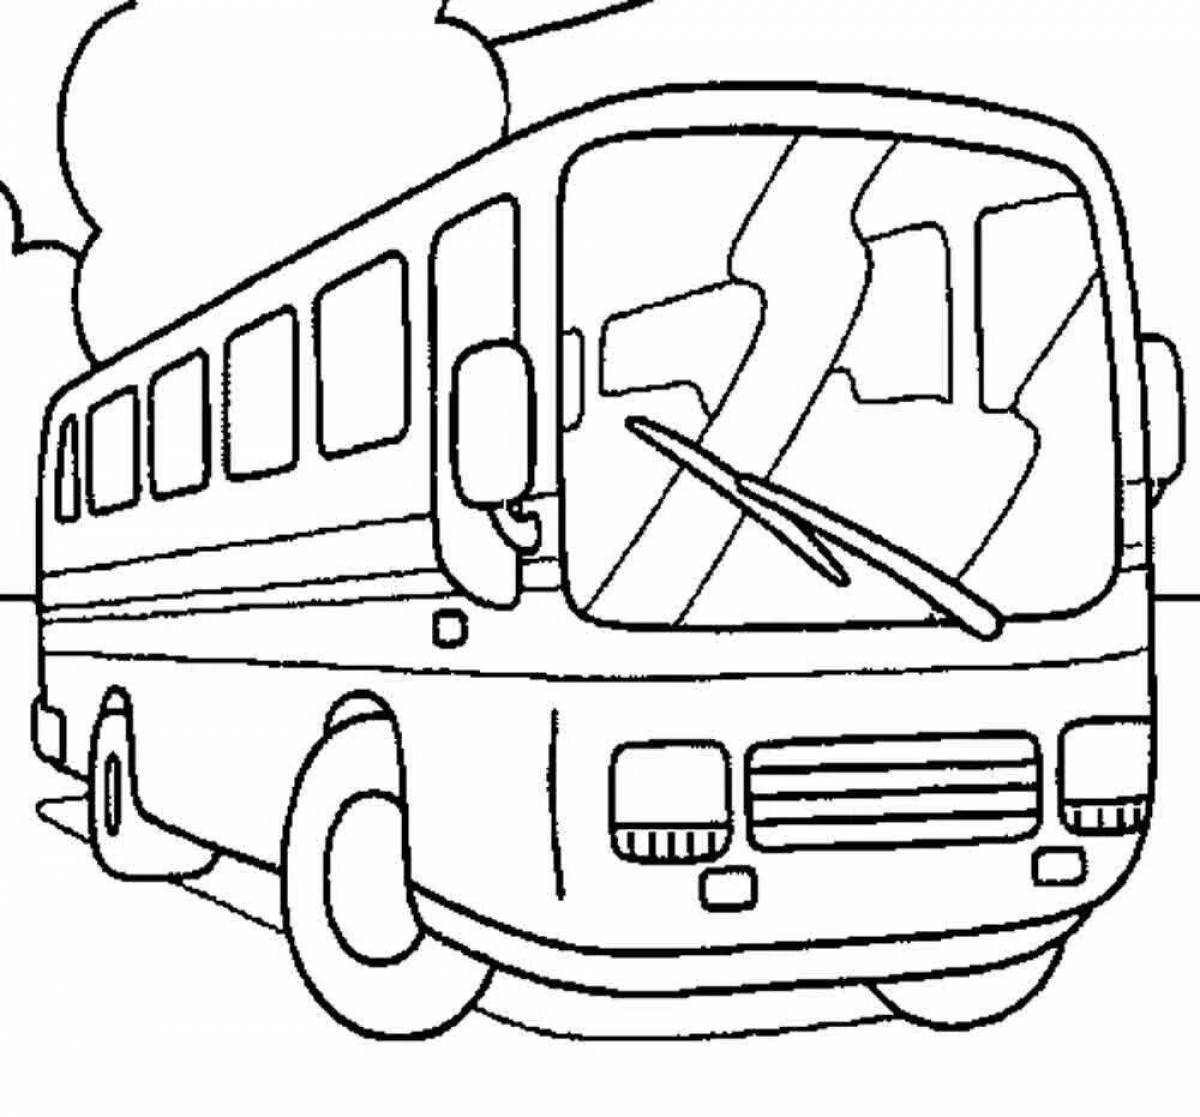 Bright transport coloring